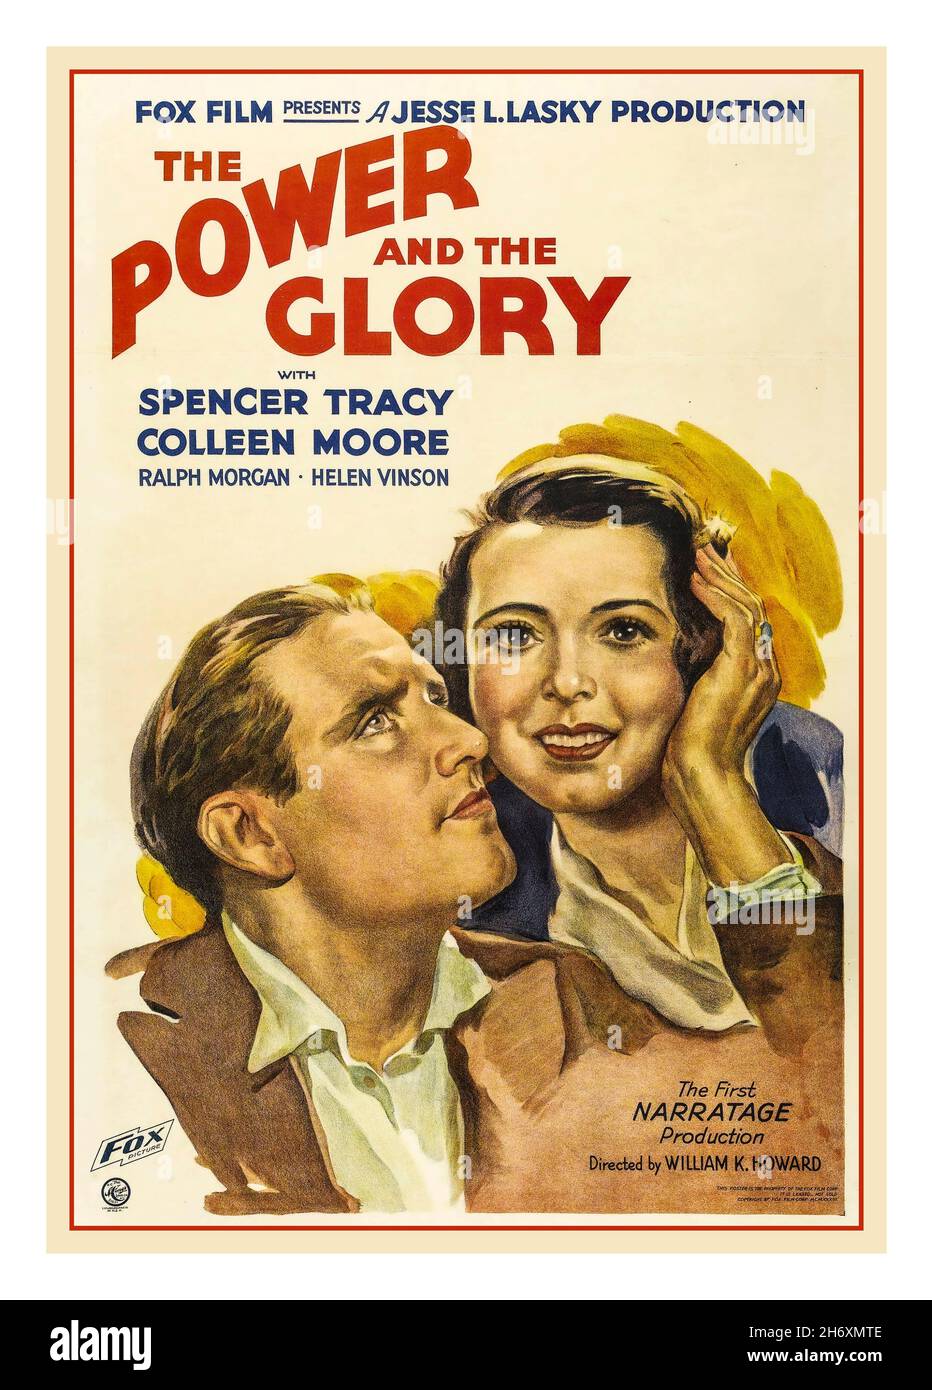 THE POWER & THE GLORY Vintage 1930s movie film poster The Power and the Glory  a 1933 pre-Code film starring Spencer Tracy and Colleen Moore, written by Preston Sturges, and directed by William K. Howard Stock Photo